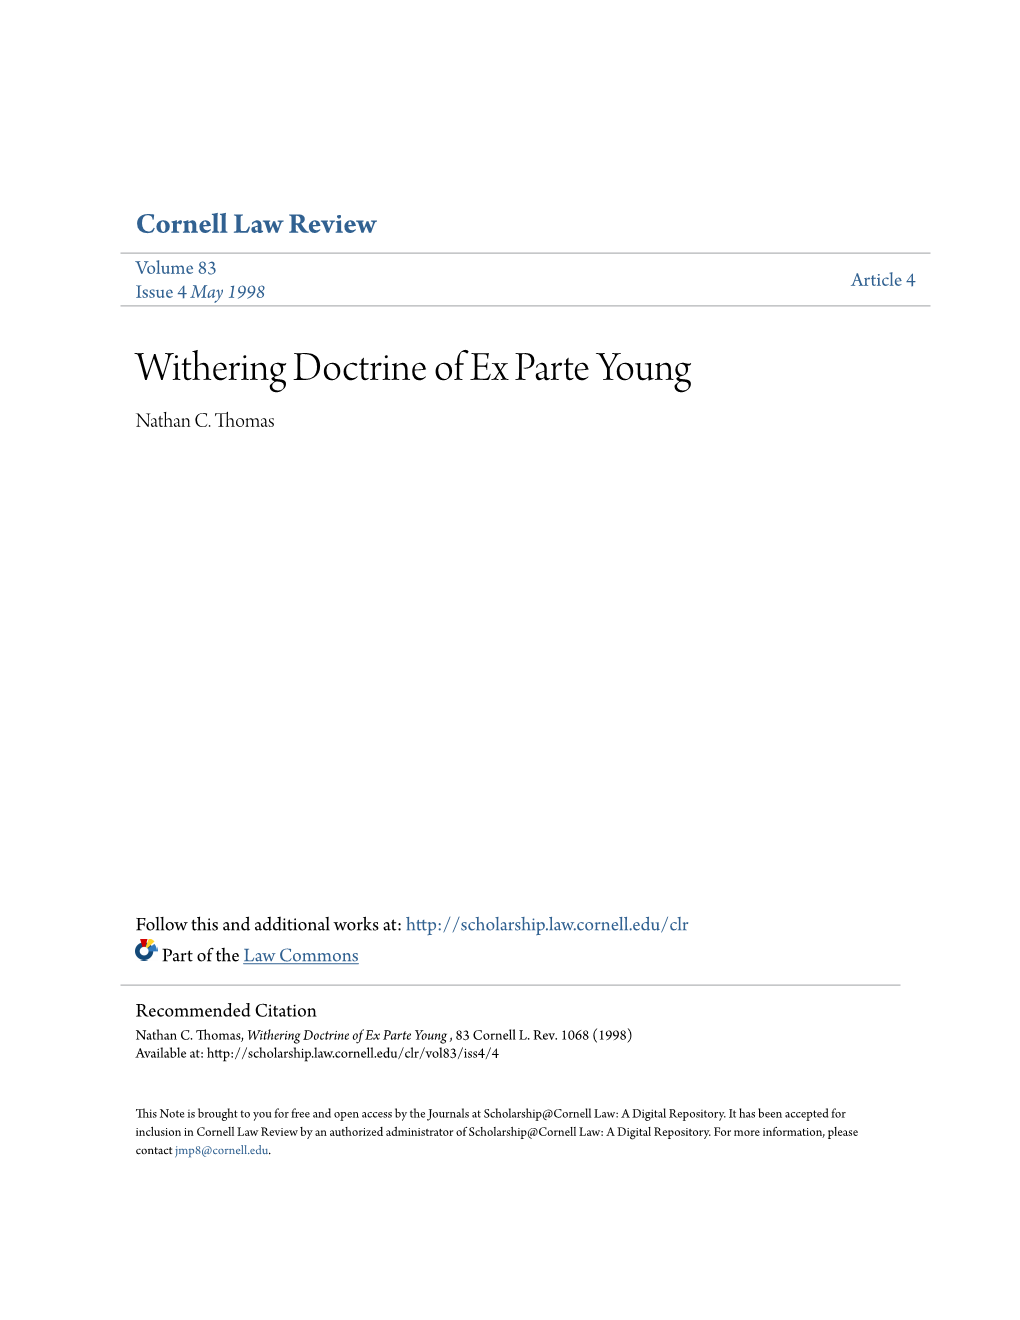 Withering Doctrine of Ex Parte Young Nathan C